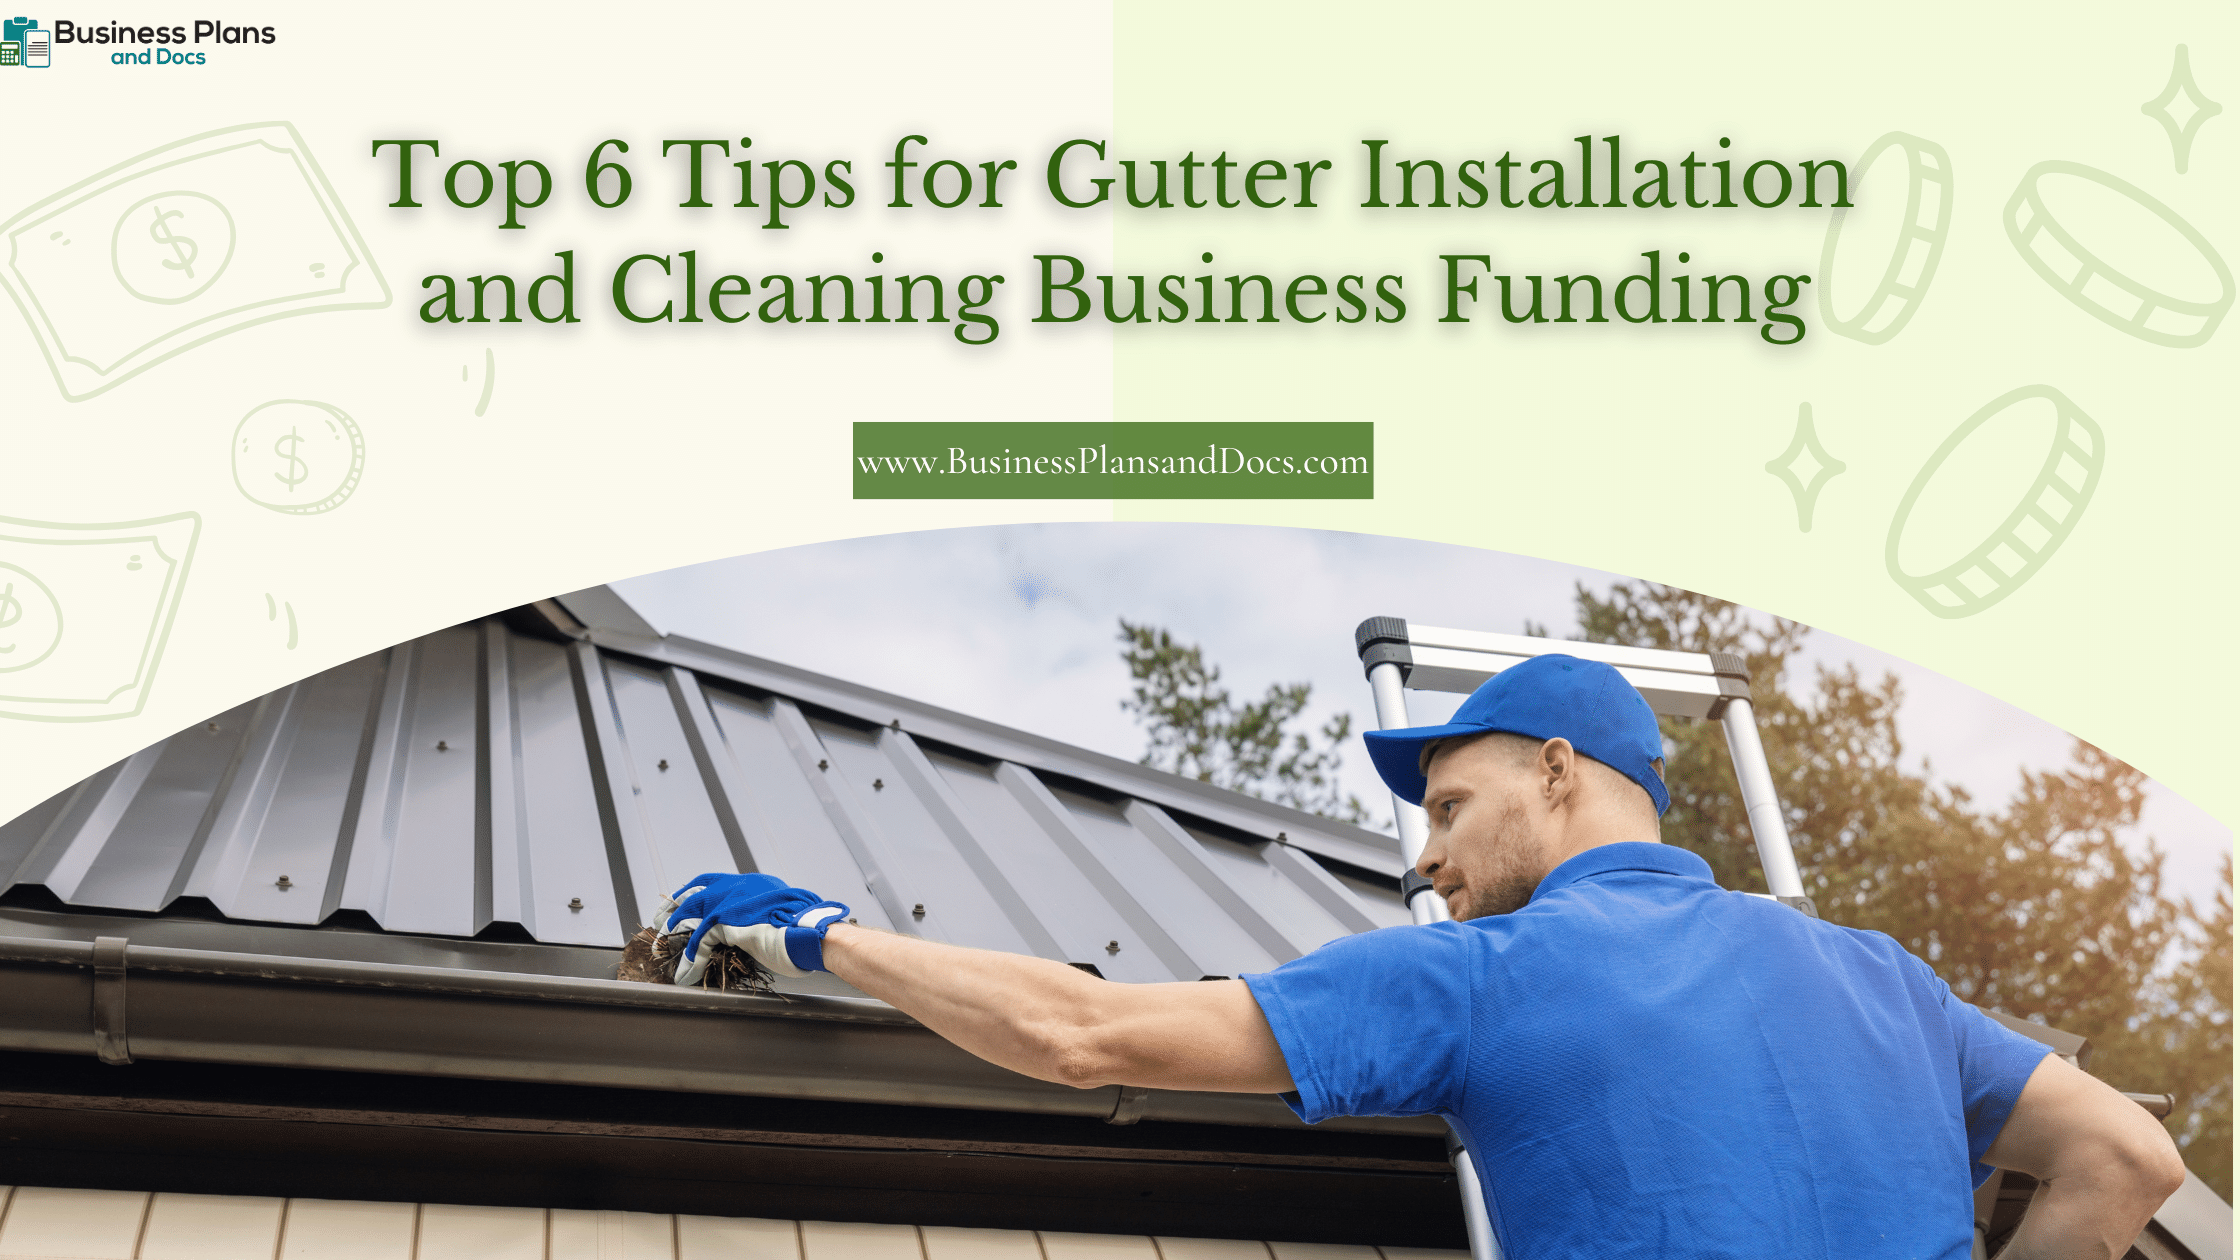 Top 6 Tips for Gutter Installation and Cleaning Business Funding